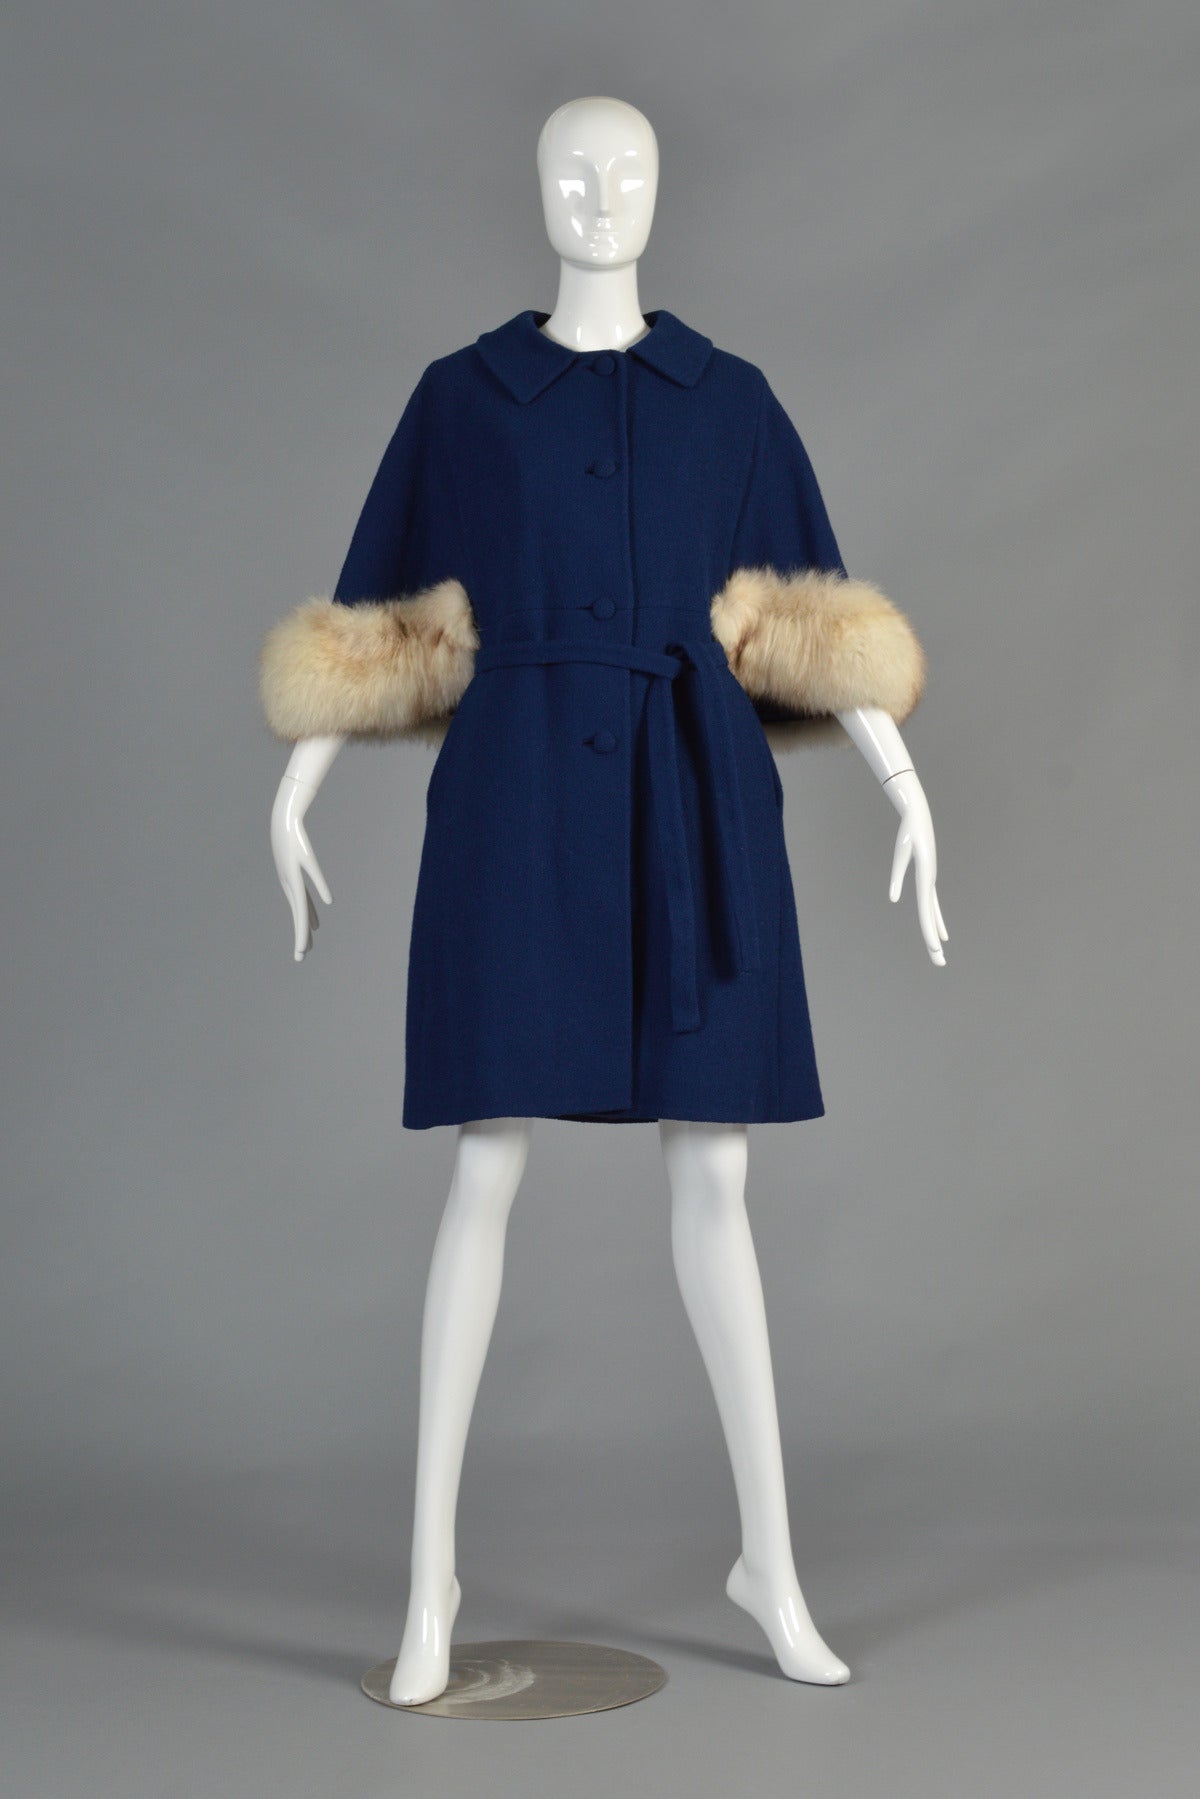 Superb vintage 1960s navy blue wool cape coat with fox trim. Absolutely awesome, on trend vintage find! Button front with slightly flared hem, side pockets, optional belt + flared cape back with HUGE genuine blue fox fur trim. We love the tiny tab